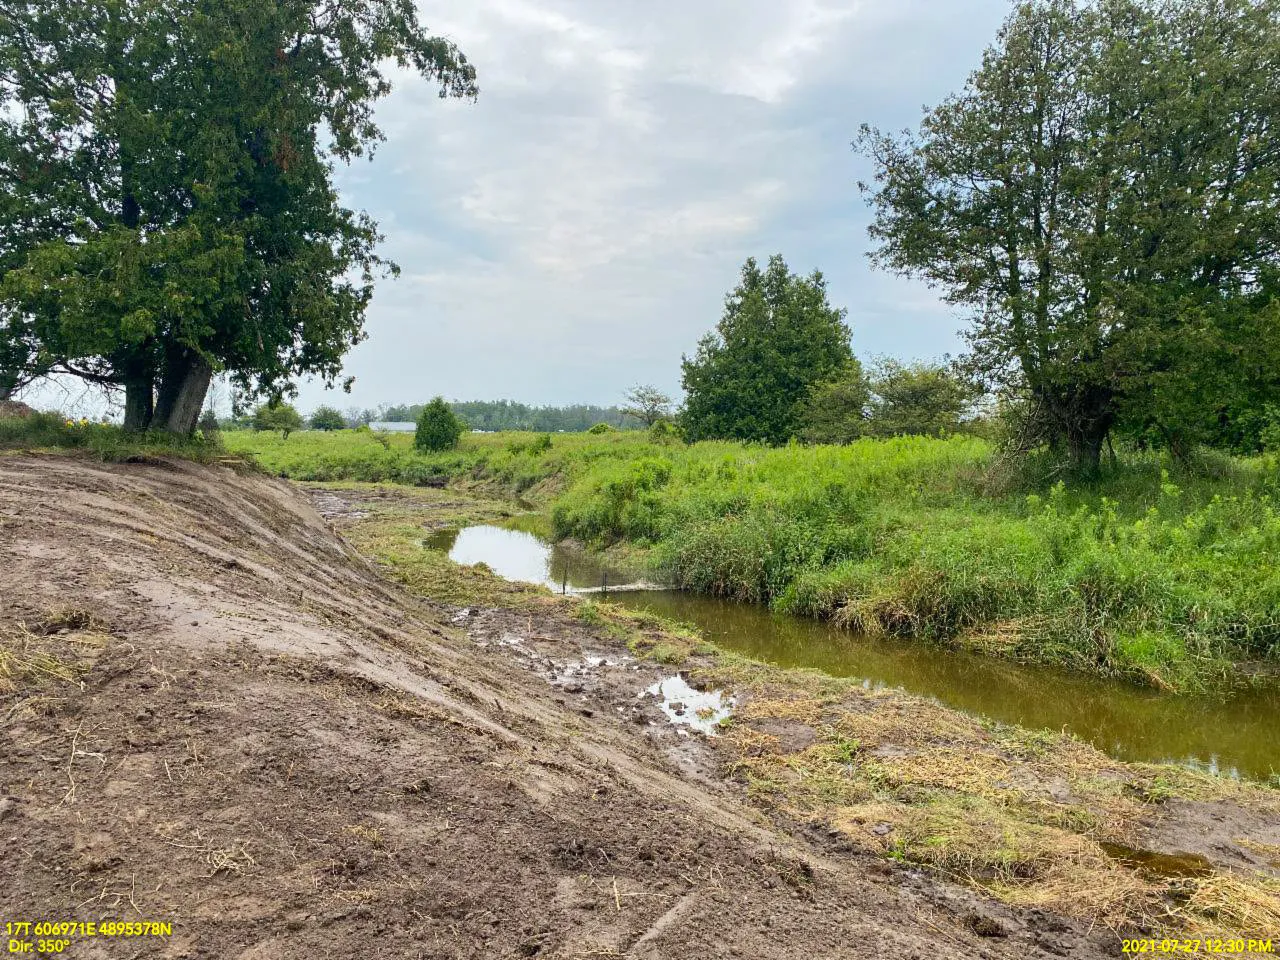 Innisfil Drain new banks with sod mats